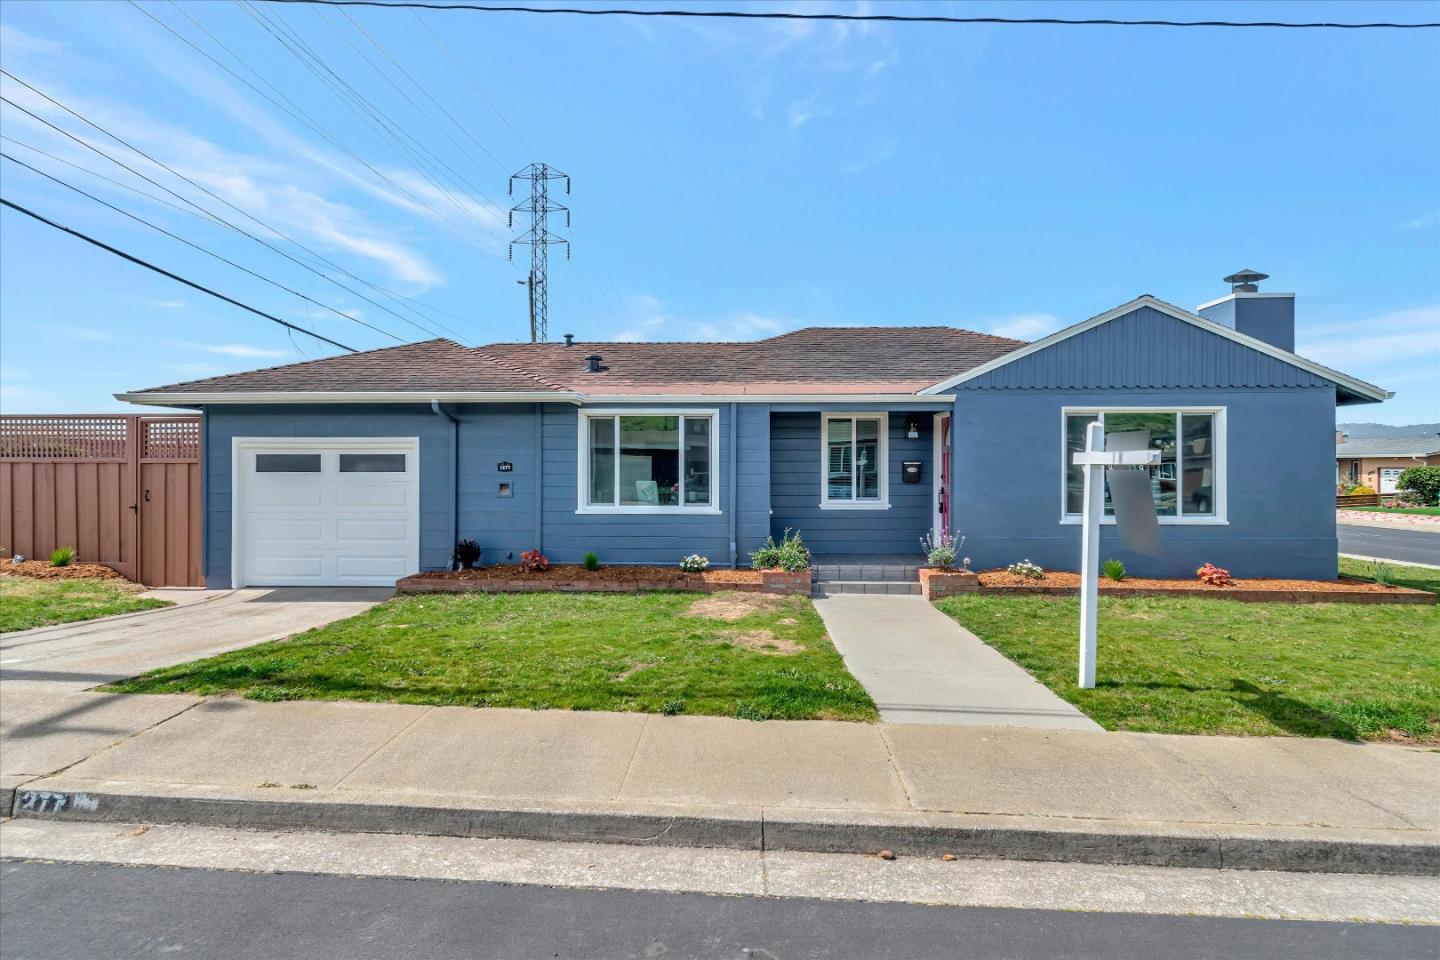 Photo of 1277 Crestwood Dr in South San Francisco, CA